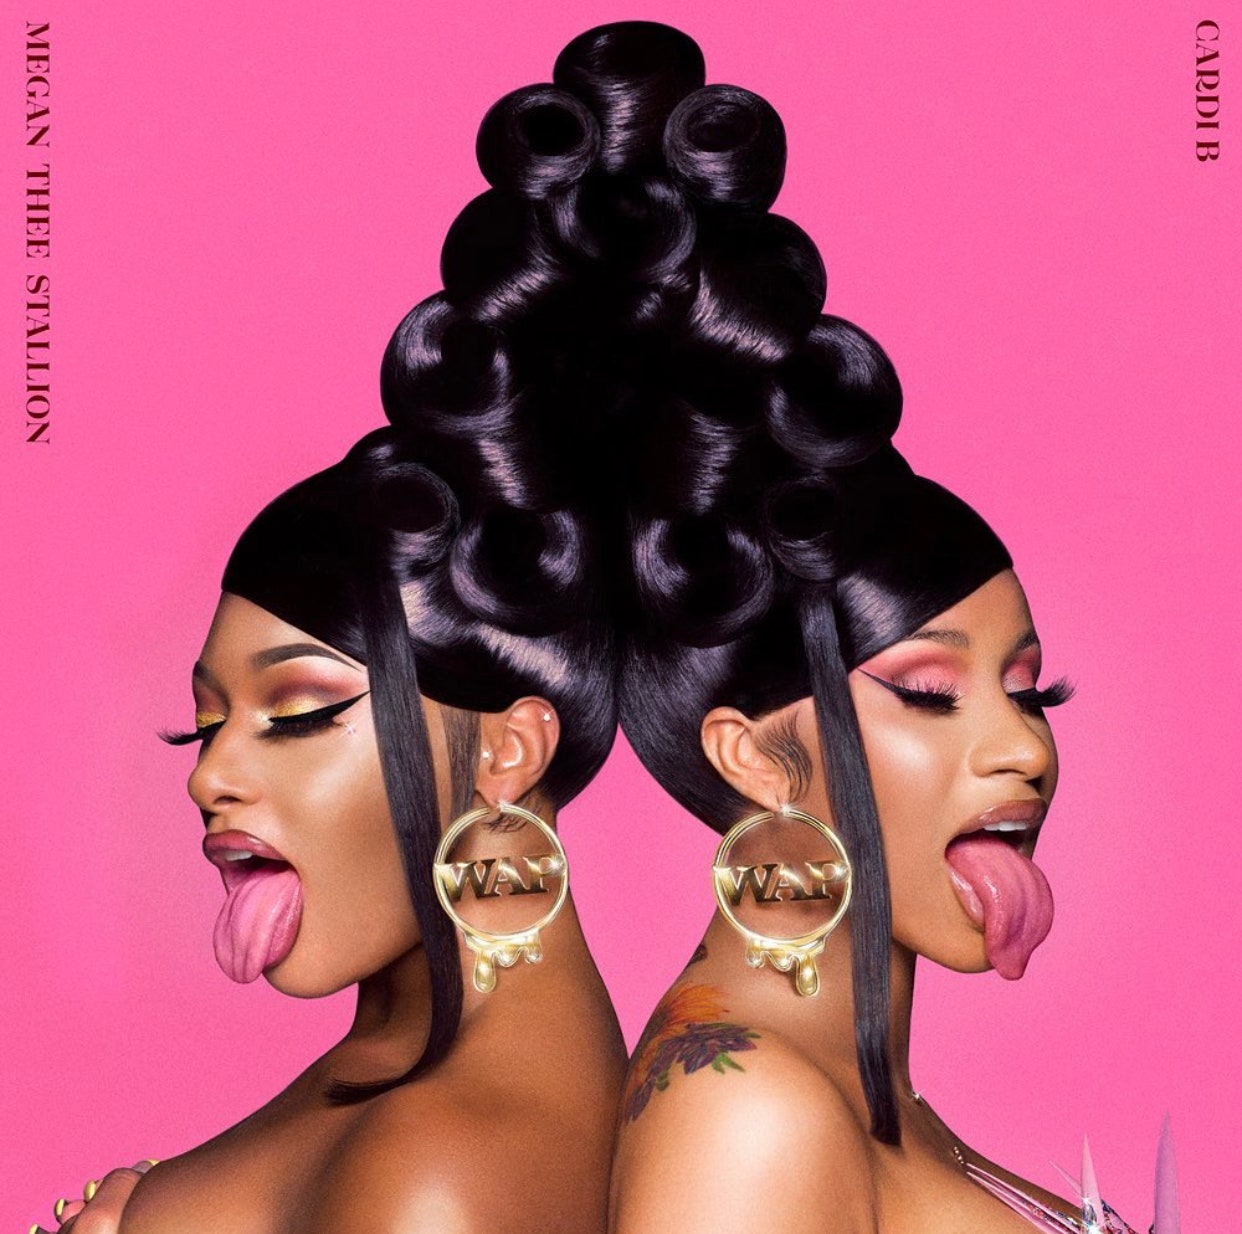 Megan Thee Stallion and Cardi B Have '90s Updos in Cover Photo for New Single 'WAP'